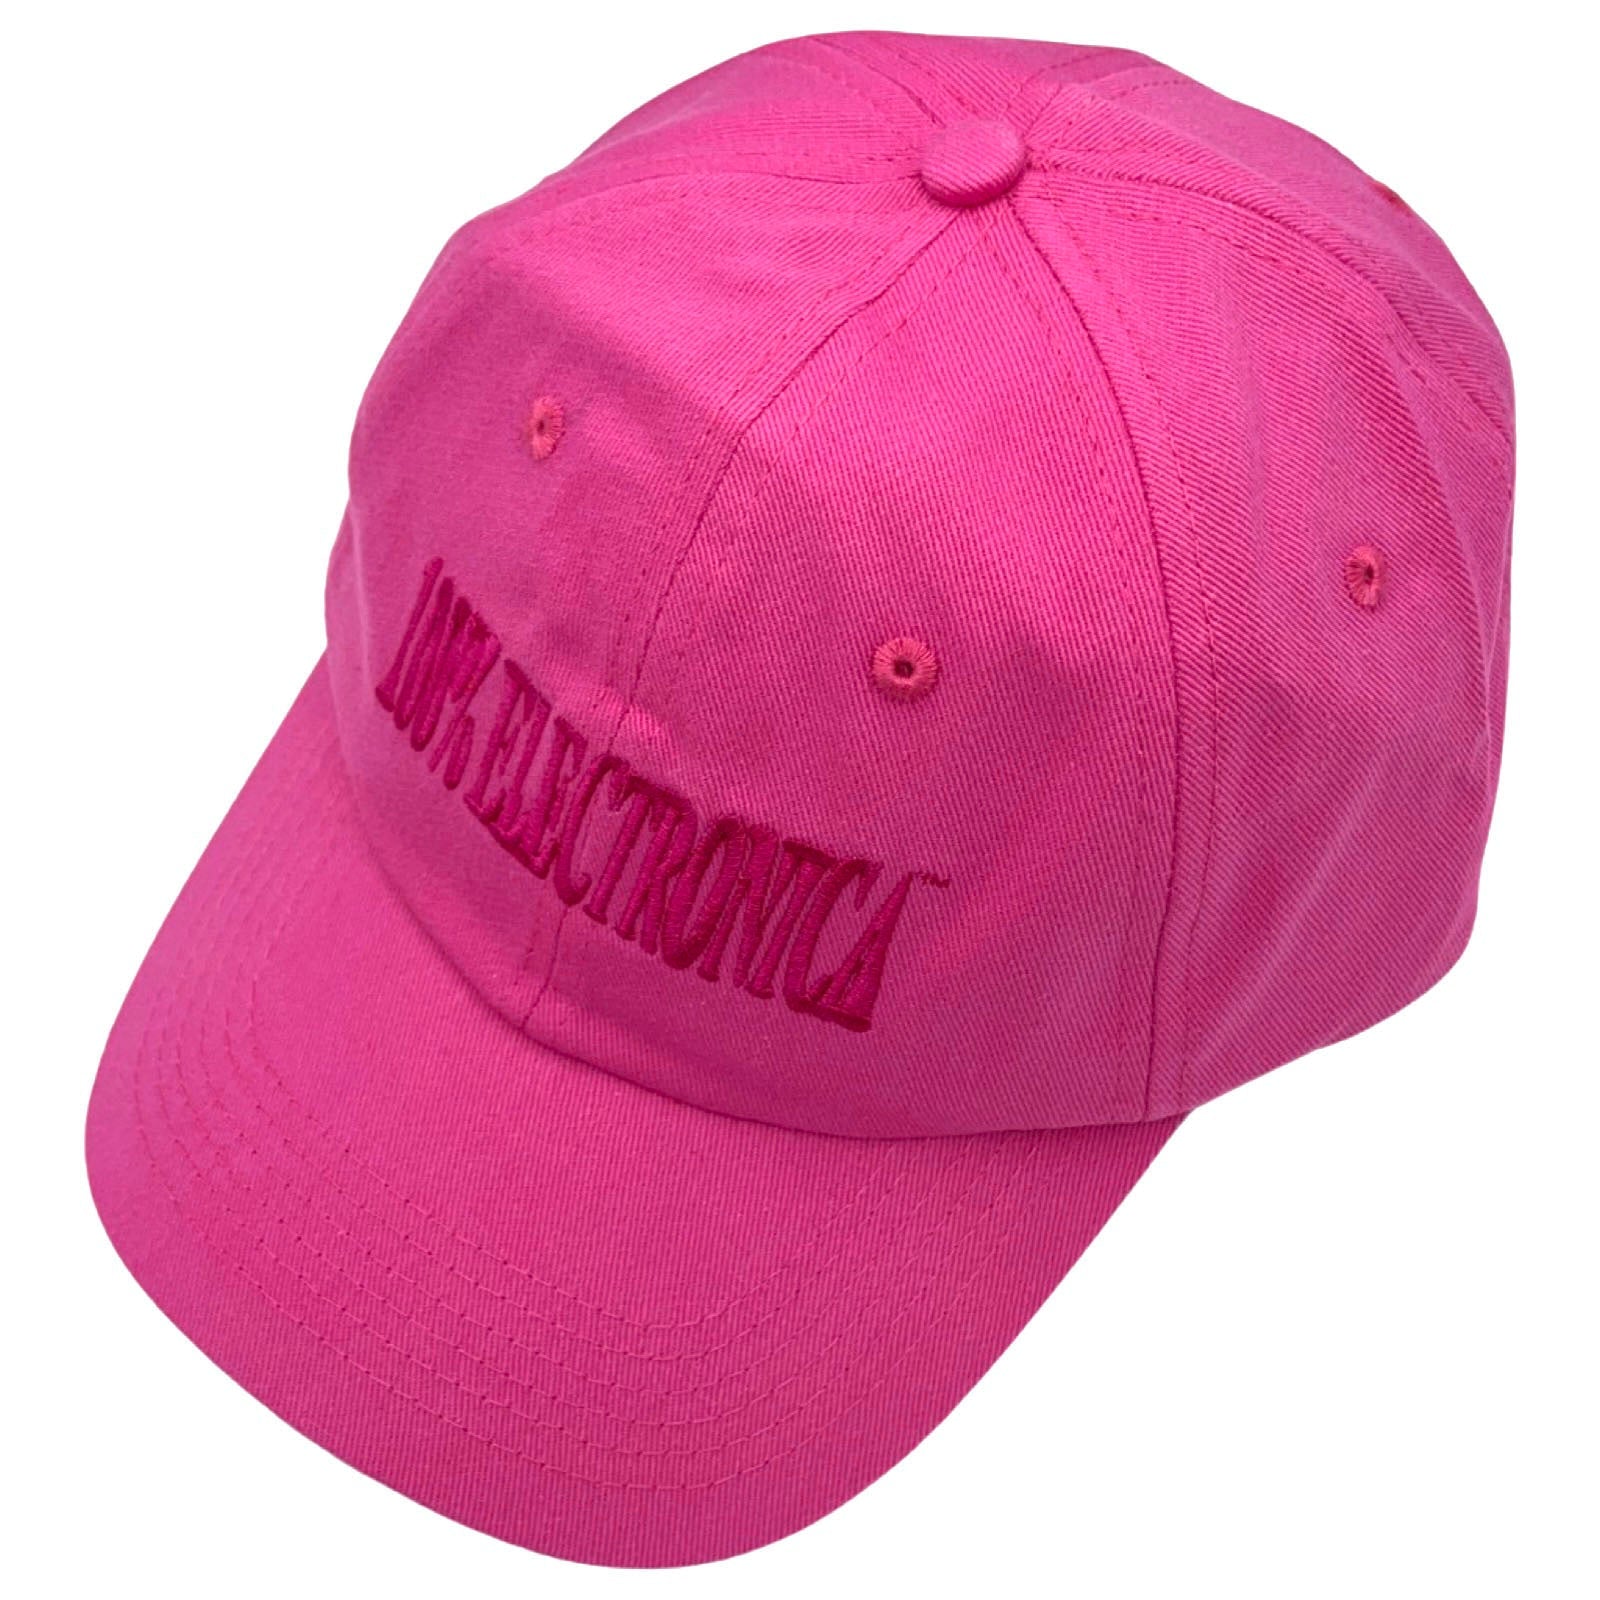 100% Electronica - Melt Logo Cap (Pink) - 100% Electronica Official Store (Photo 1)